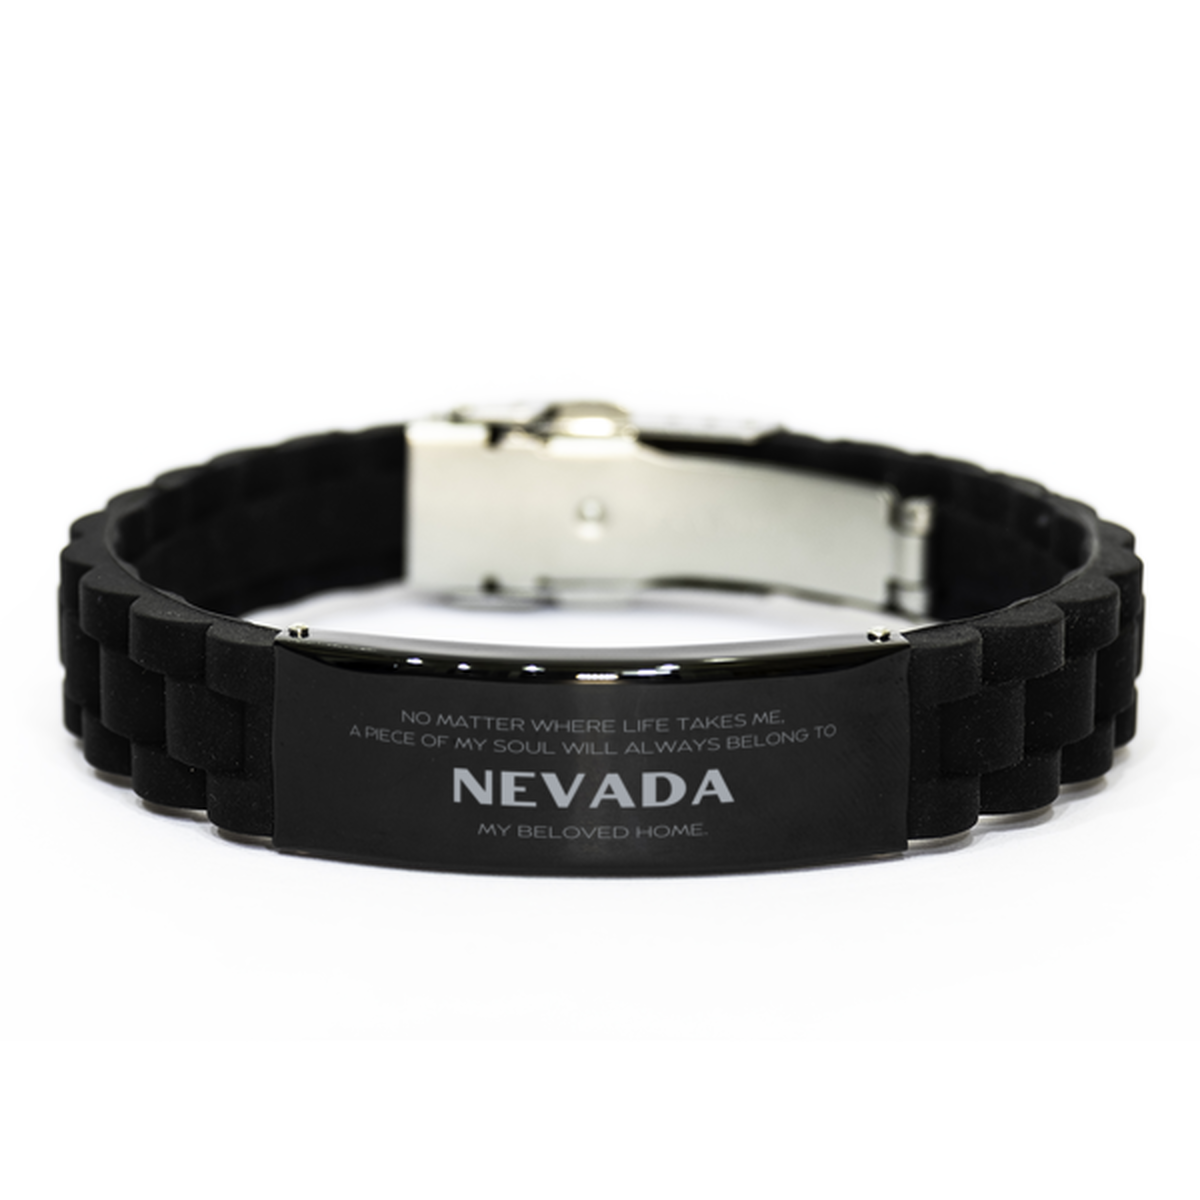 Love Nevada State Gifts, My soul will always belong to Nevada, Proud Black Glidelock Clasp Bracelet, Birthday Unique Gifts For Nevada Men, Women, Friends